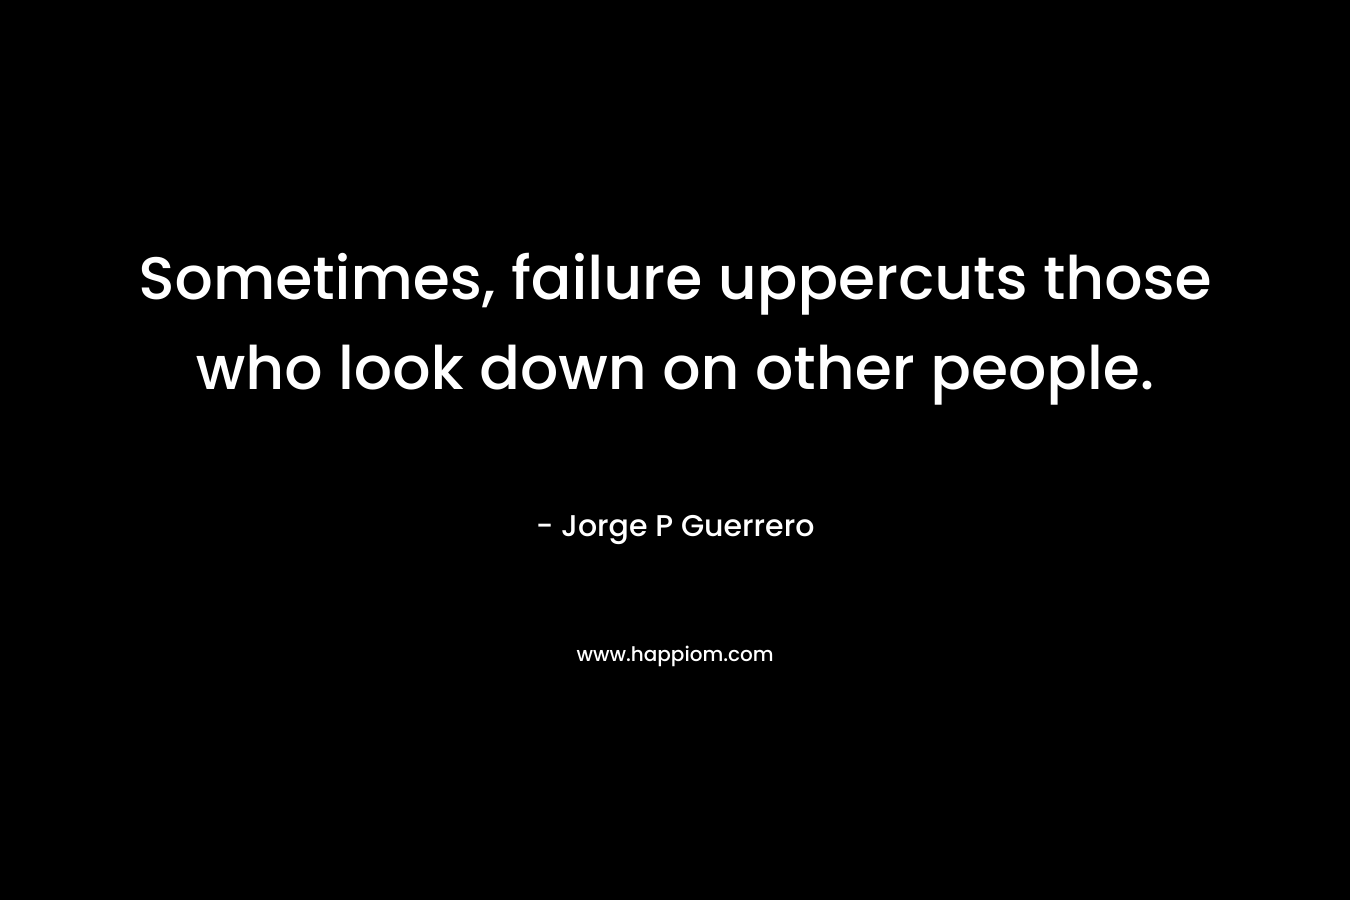 Sometimes, failure uppercuts those who look down on other people. – Jorge P Guerrero